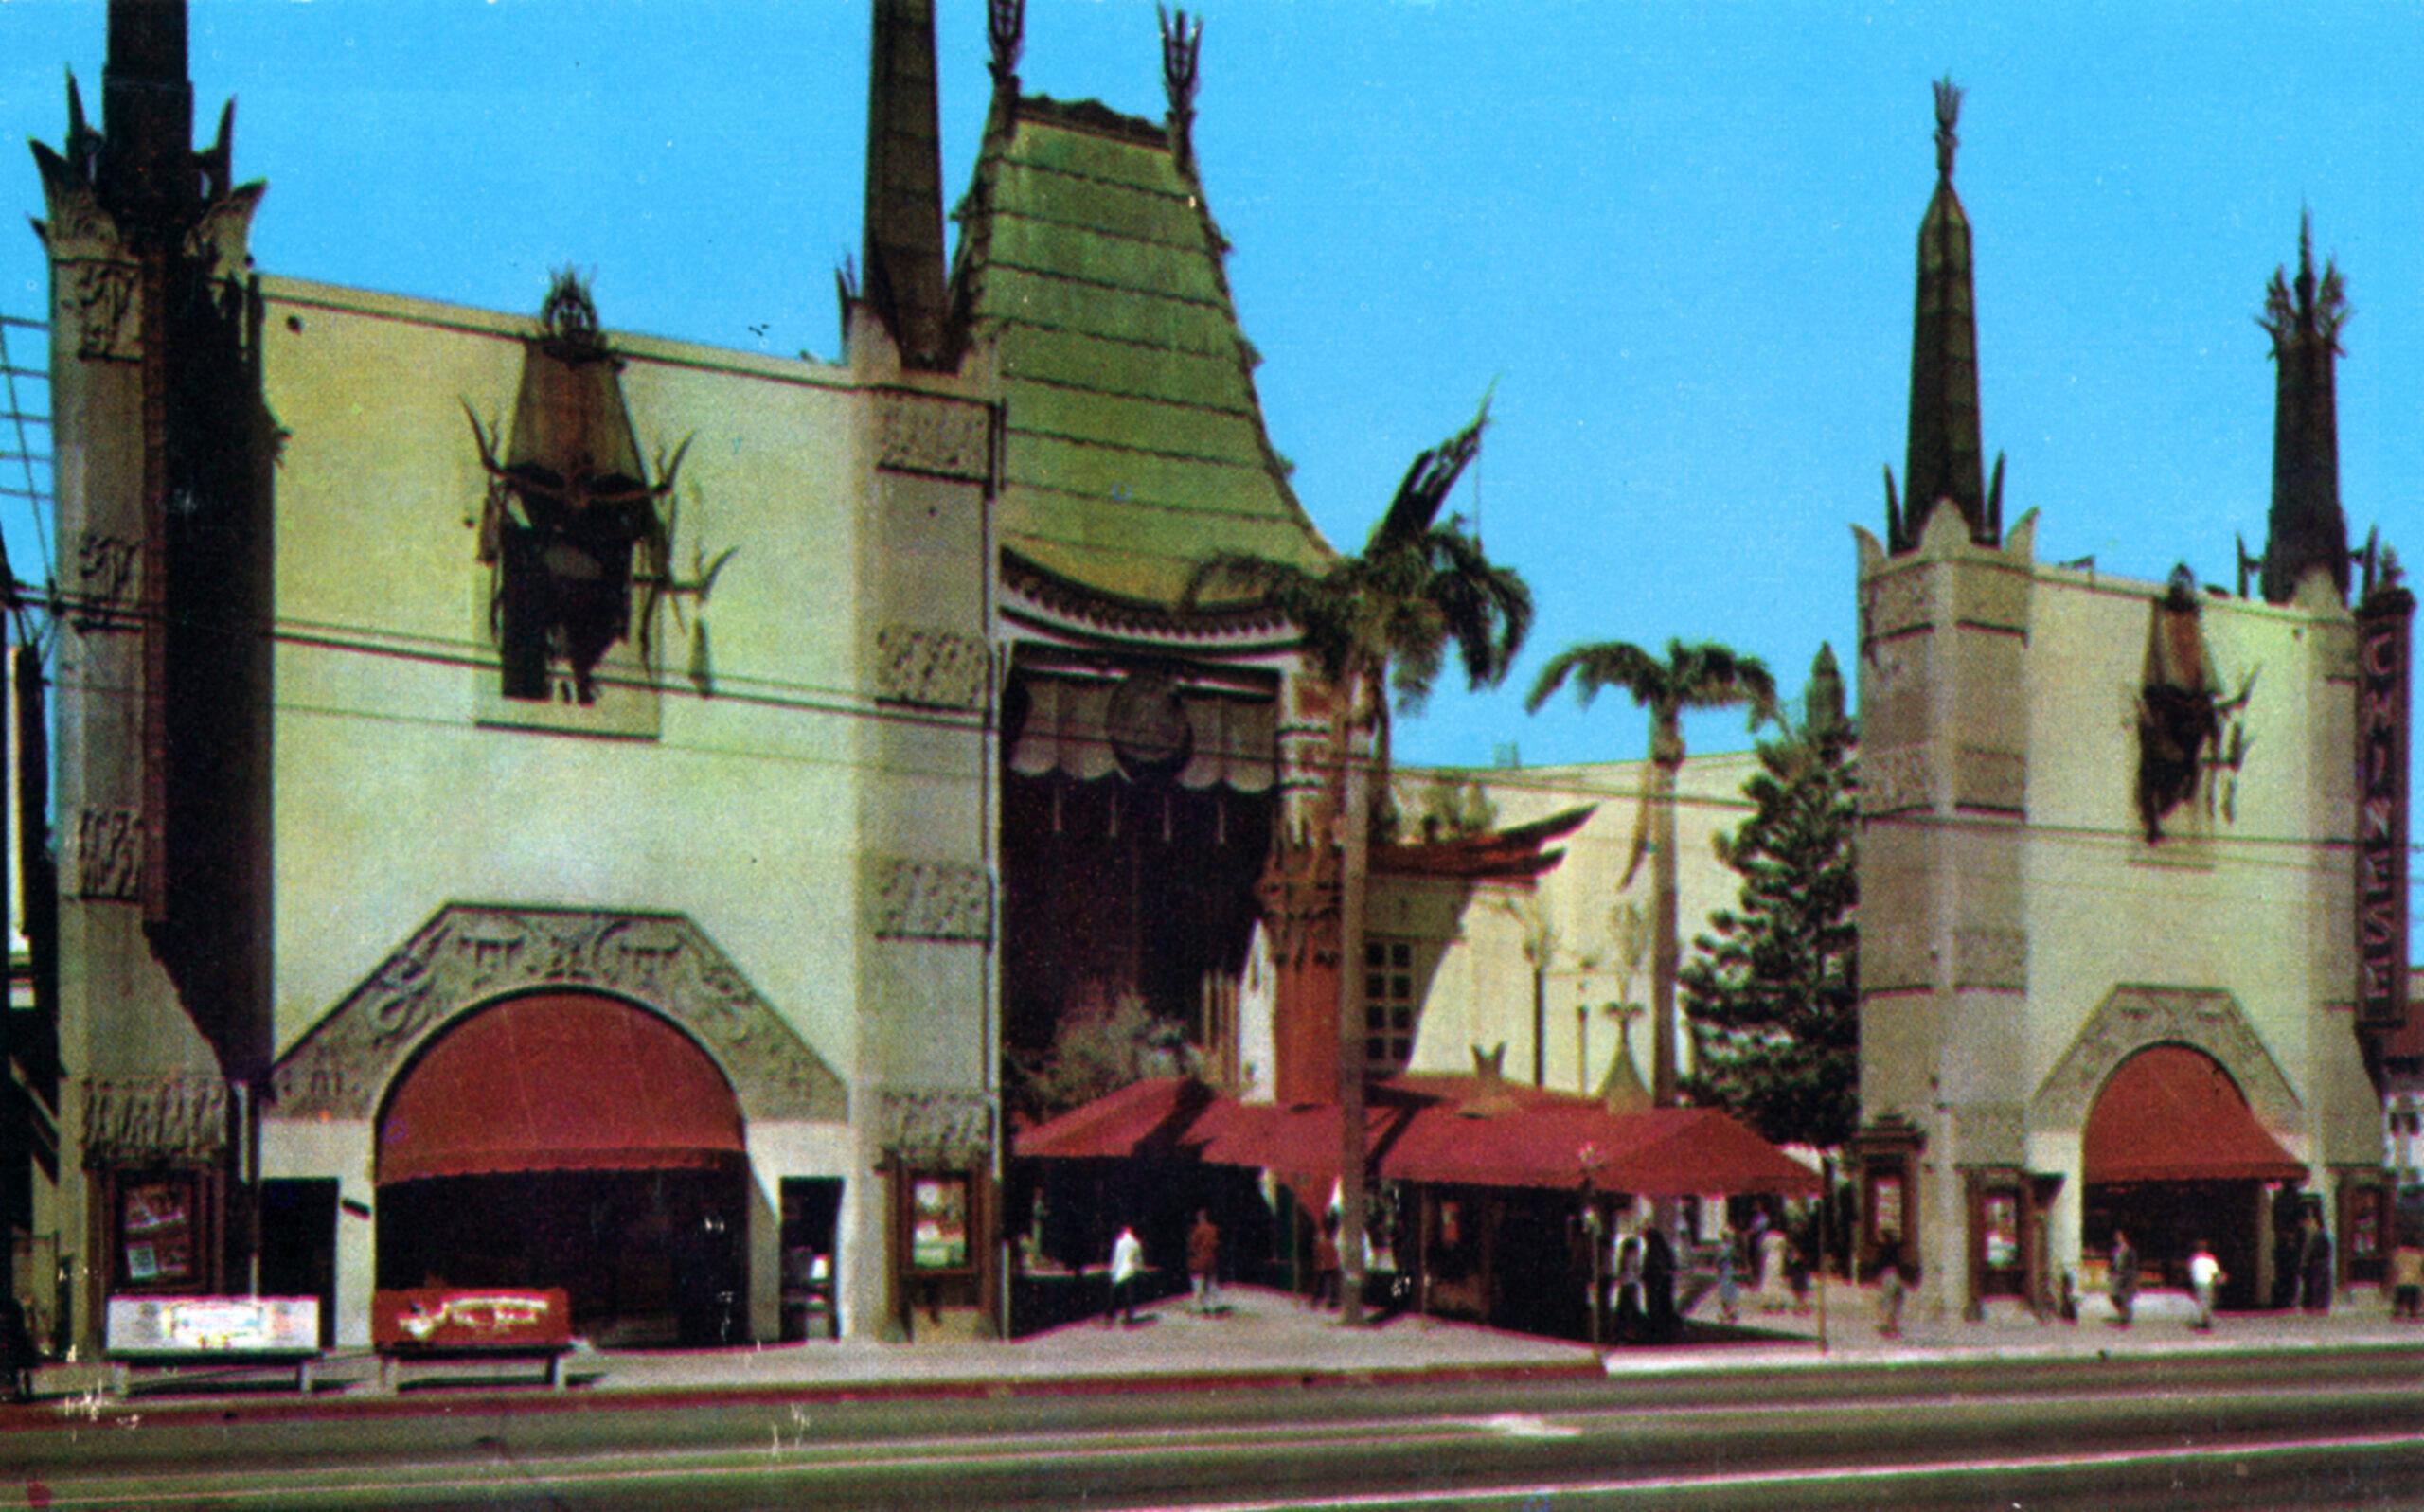 Hollywood's Chinese Theatre Suing For $2.5 Million After Damages During George Floyd 'Riots'